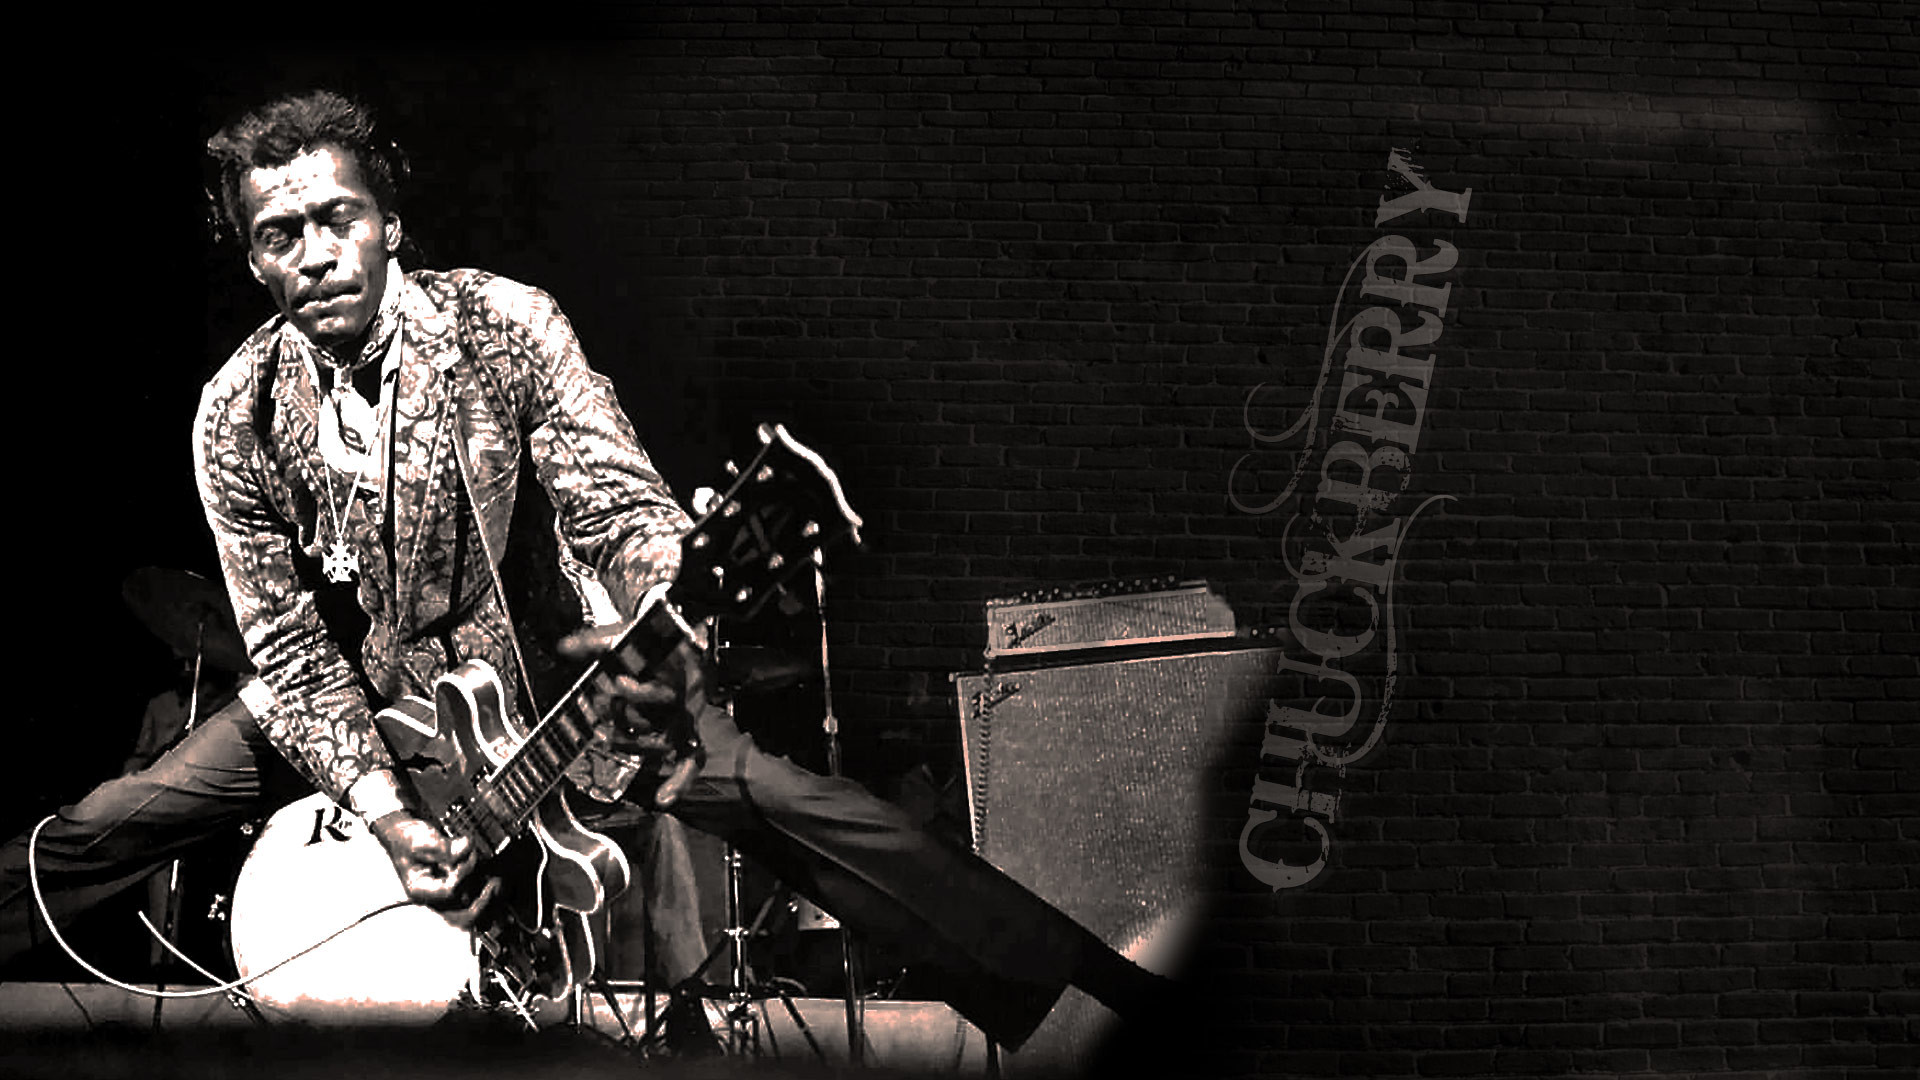 1920x1080 A tribute to the Pioneer of Rock and Roll, Chuck Berry, featuring  interviews with Bruce Springsteen and 'Johnny B Good'. RIP Chuck Berry  October 1926 - M.